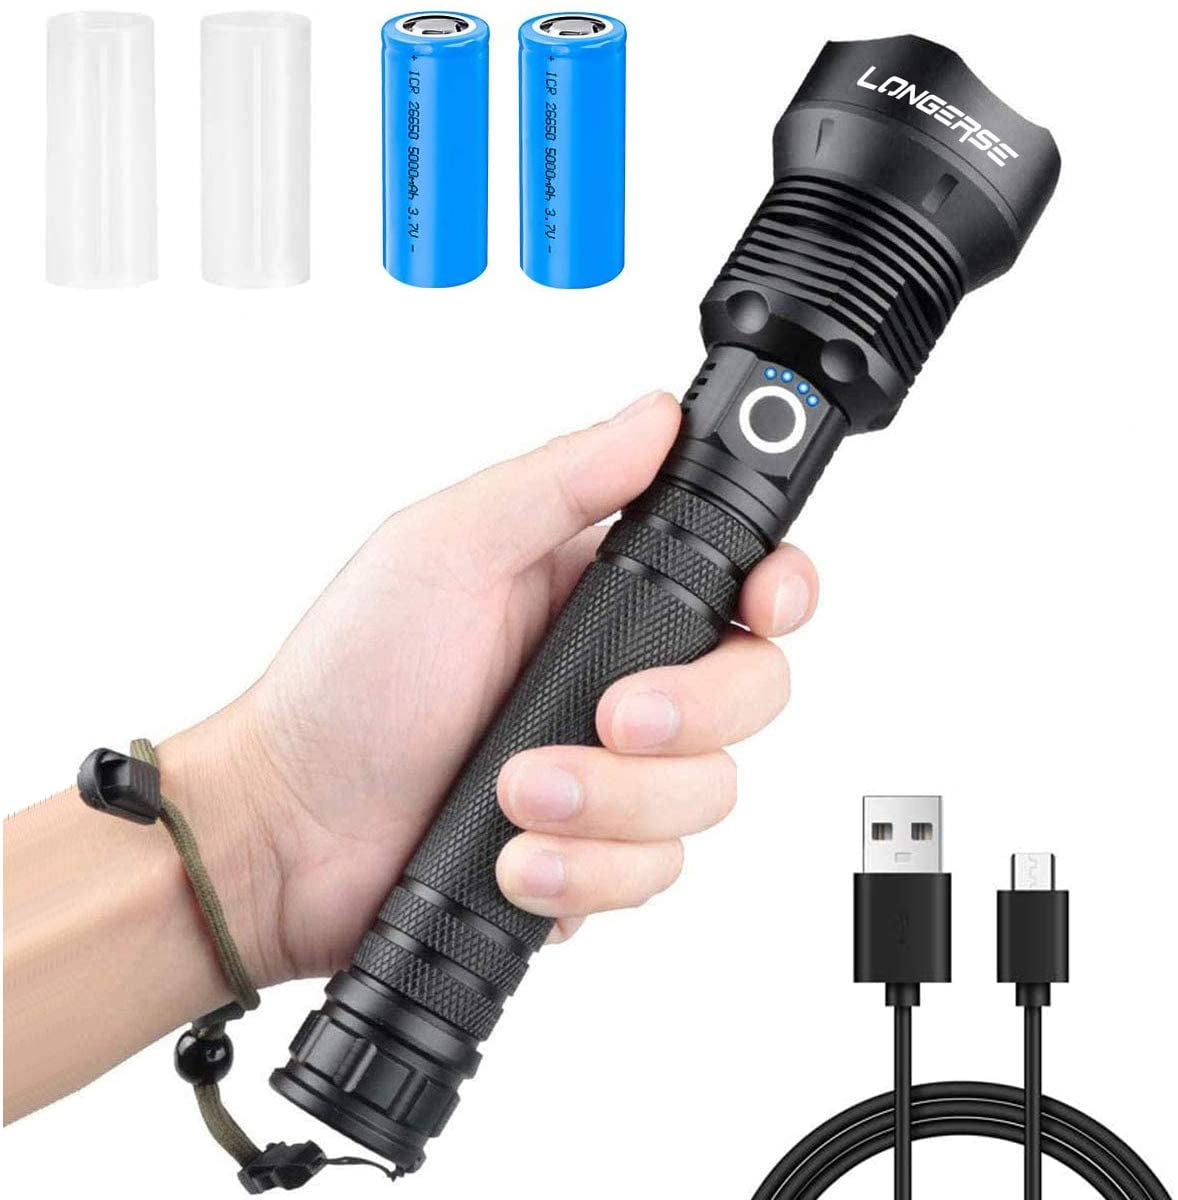 Superbright LED Aluminum Torch Tactical Durable 50000LM Flashlight Lamp Camp 